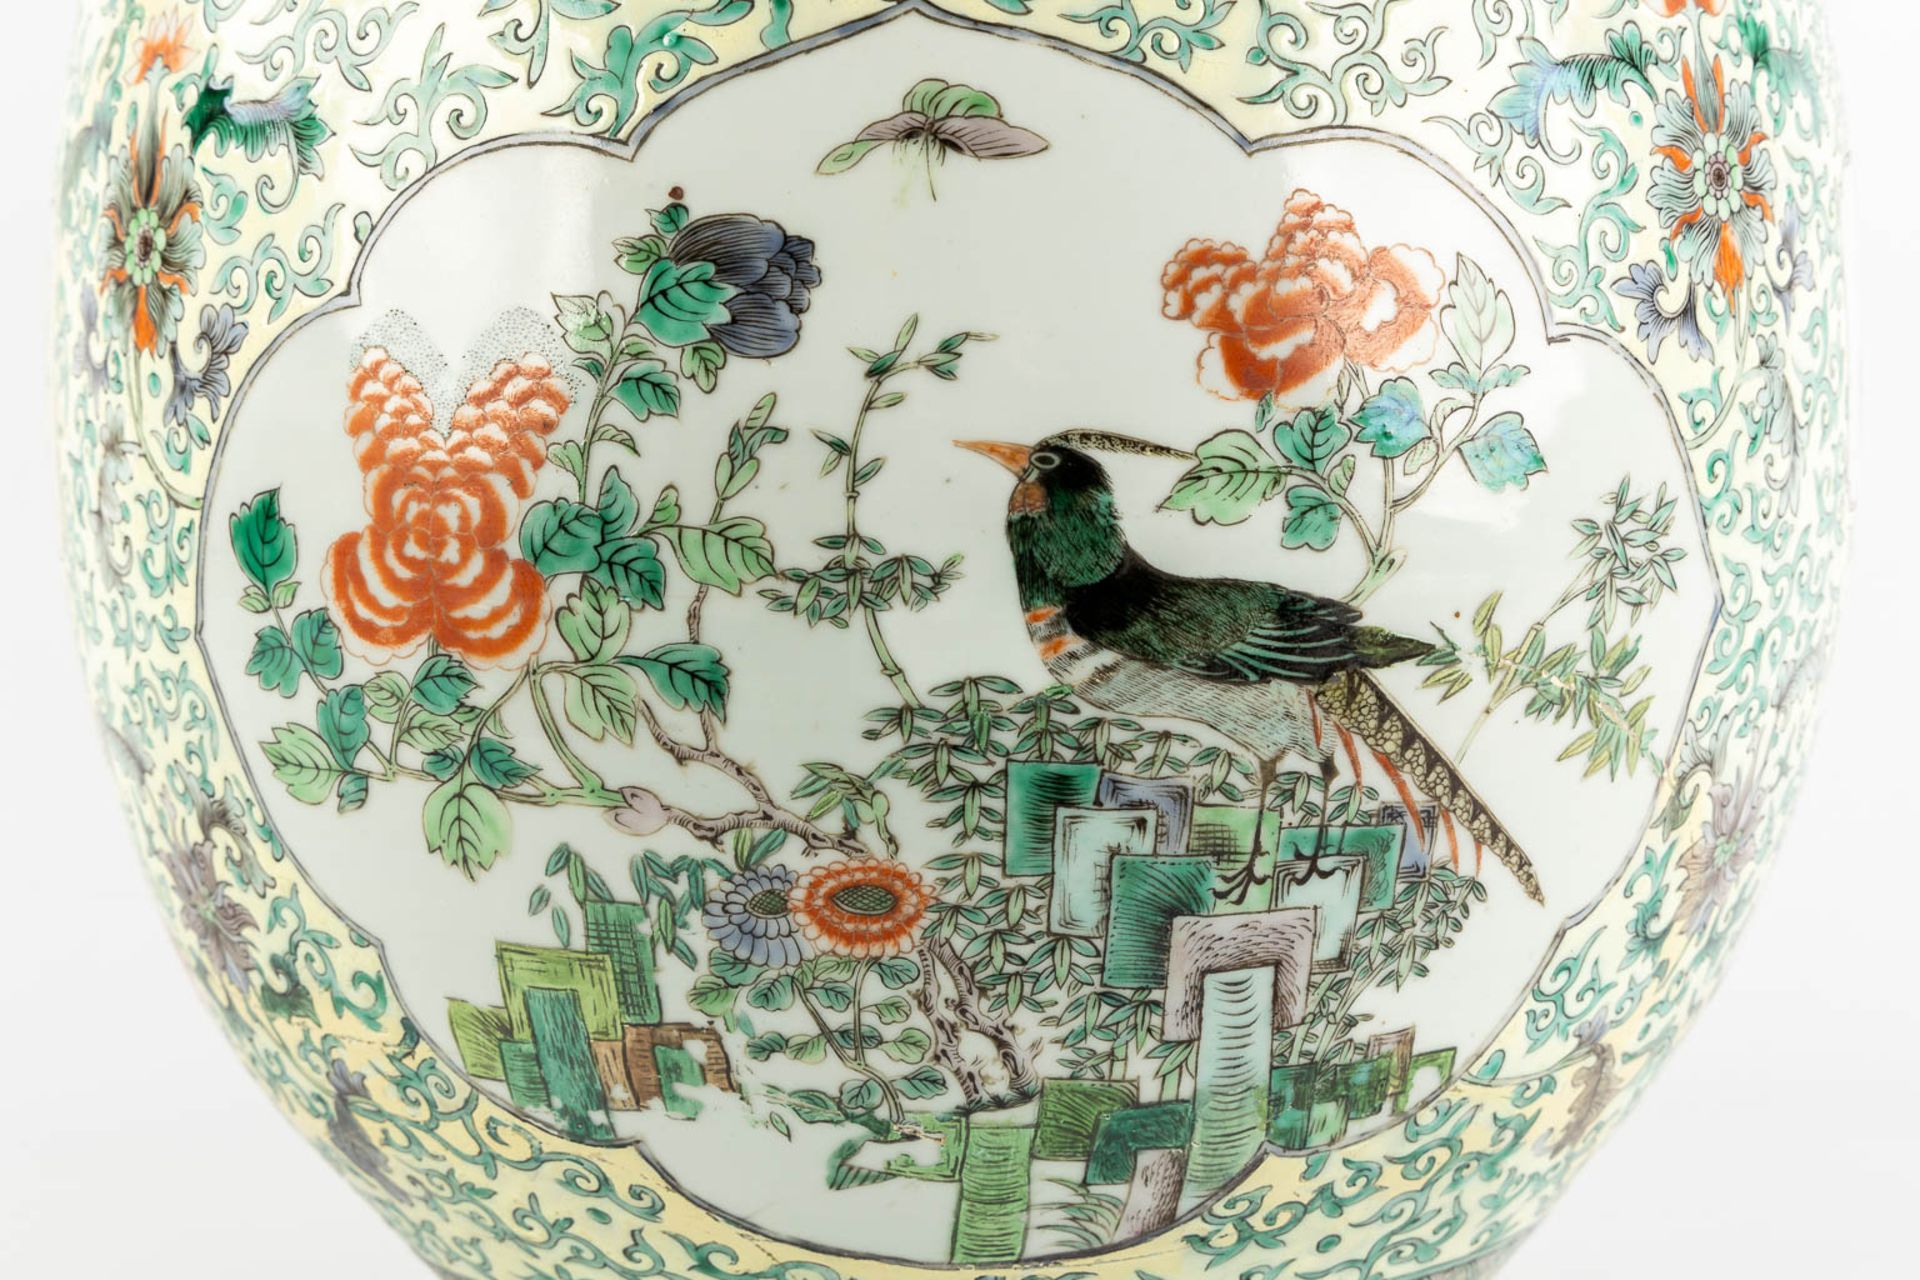 A Large Chinese Cache-Pot, Famille Verte decorated with fauna and flora. 19th C. (H:35 x D:40 cm) - Image 10 of 14